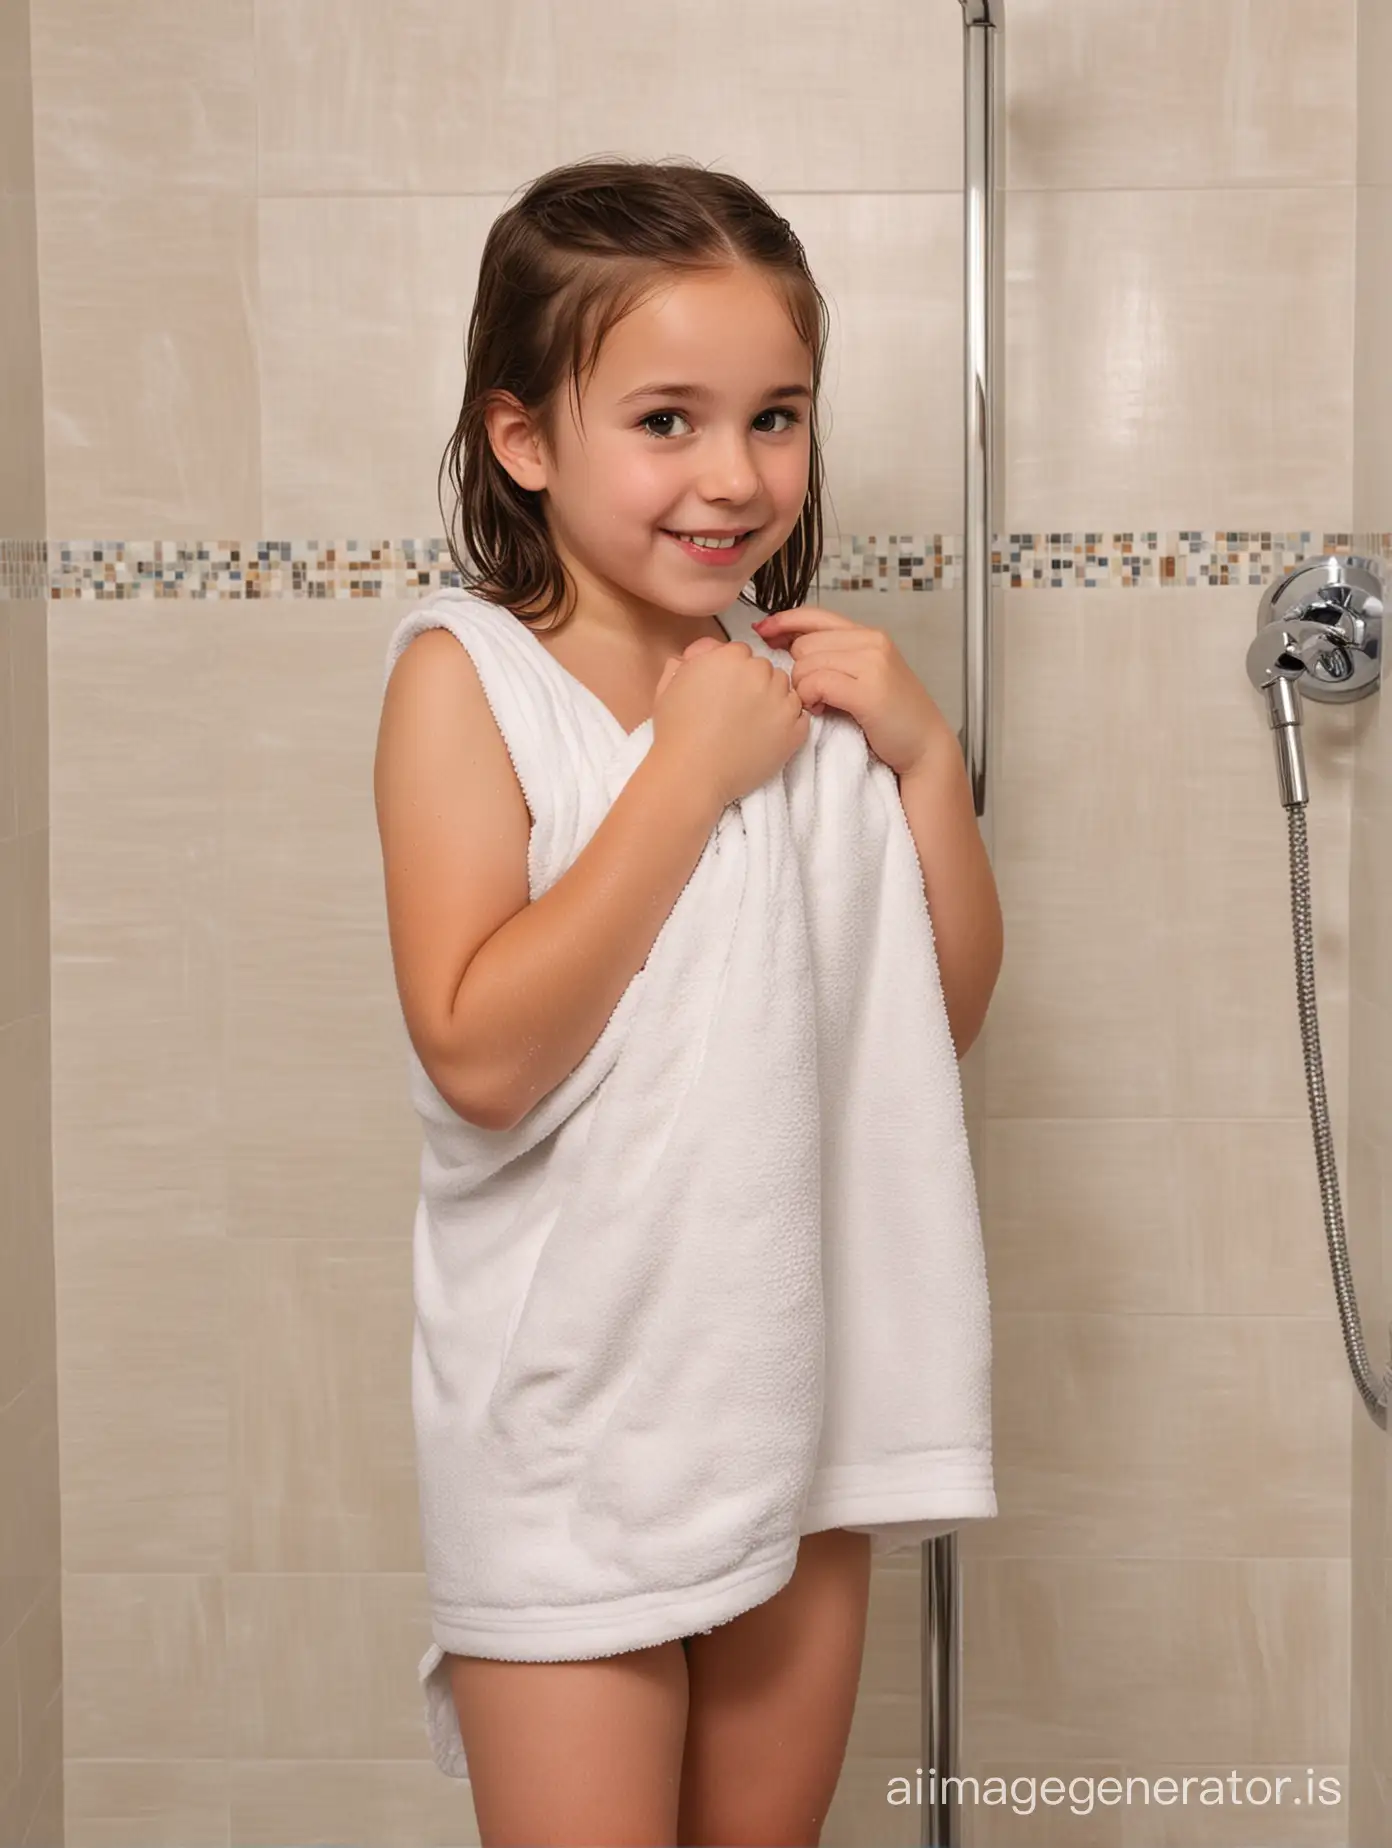 Adorable-Teenage-Girl-Bathing-with-a-Small-Towel